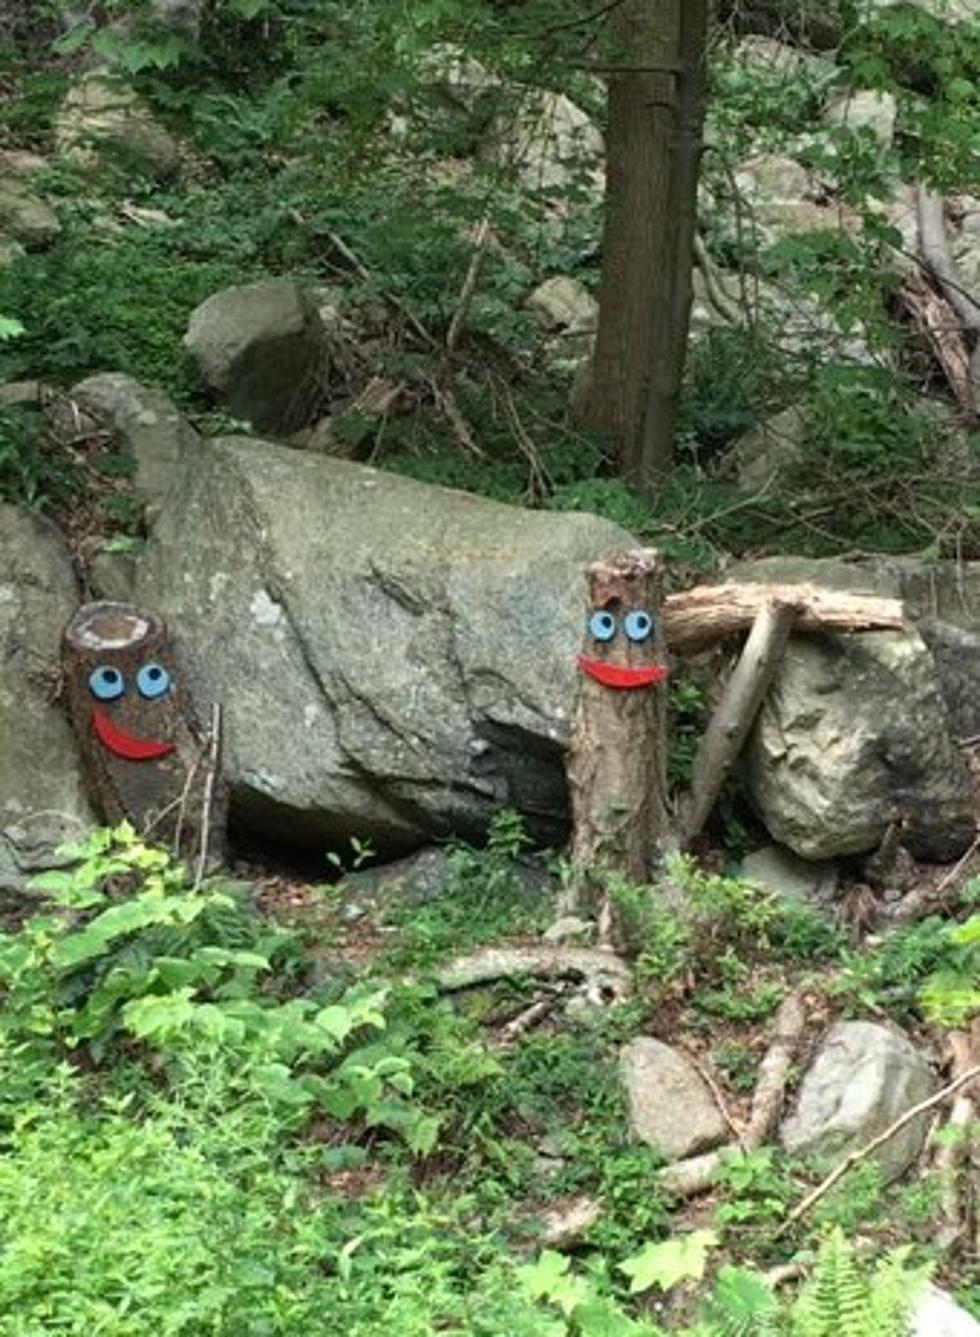 X-Files Theory Behind Creepy Faces on Hudson Valley Trees